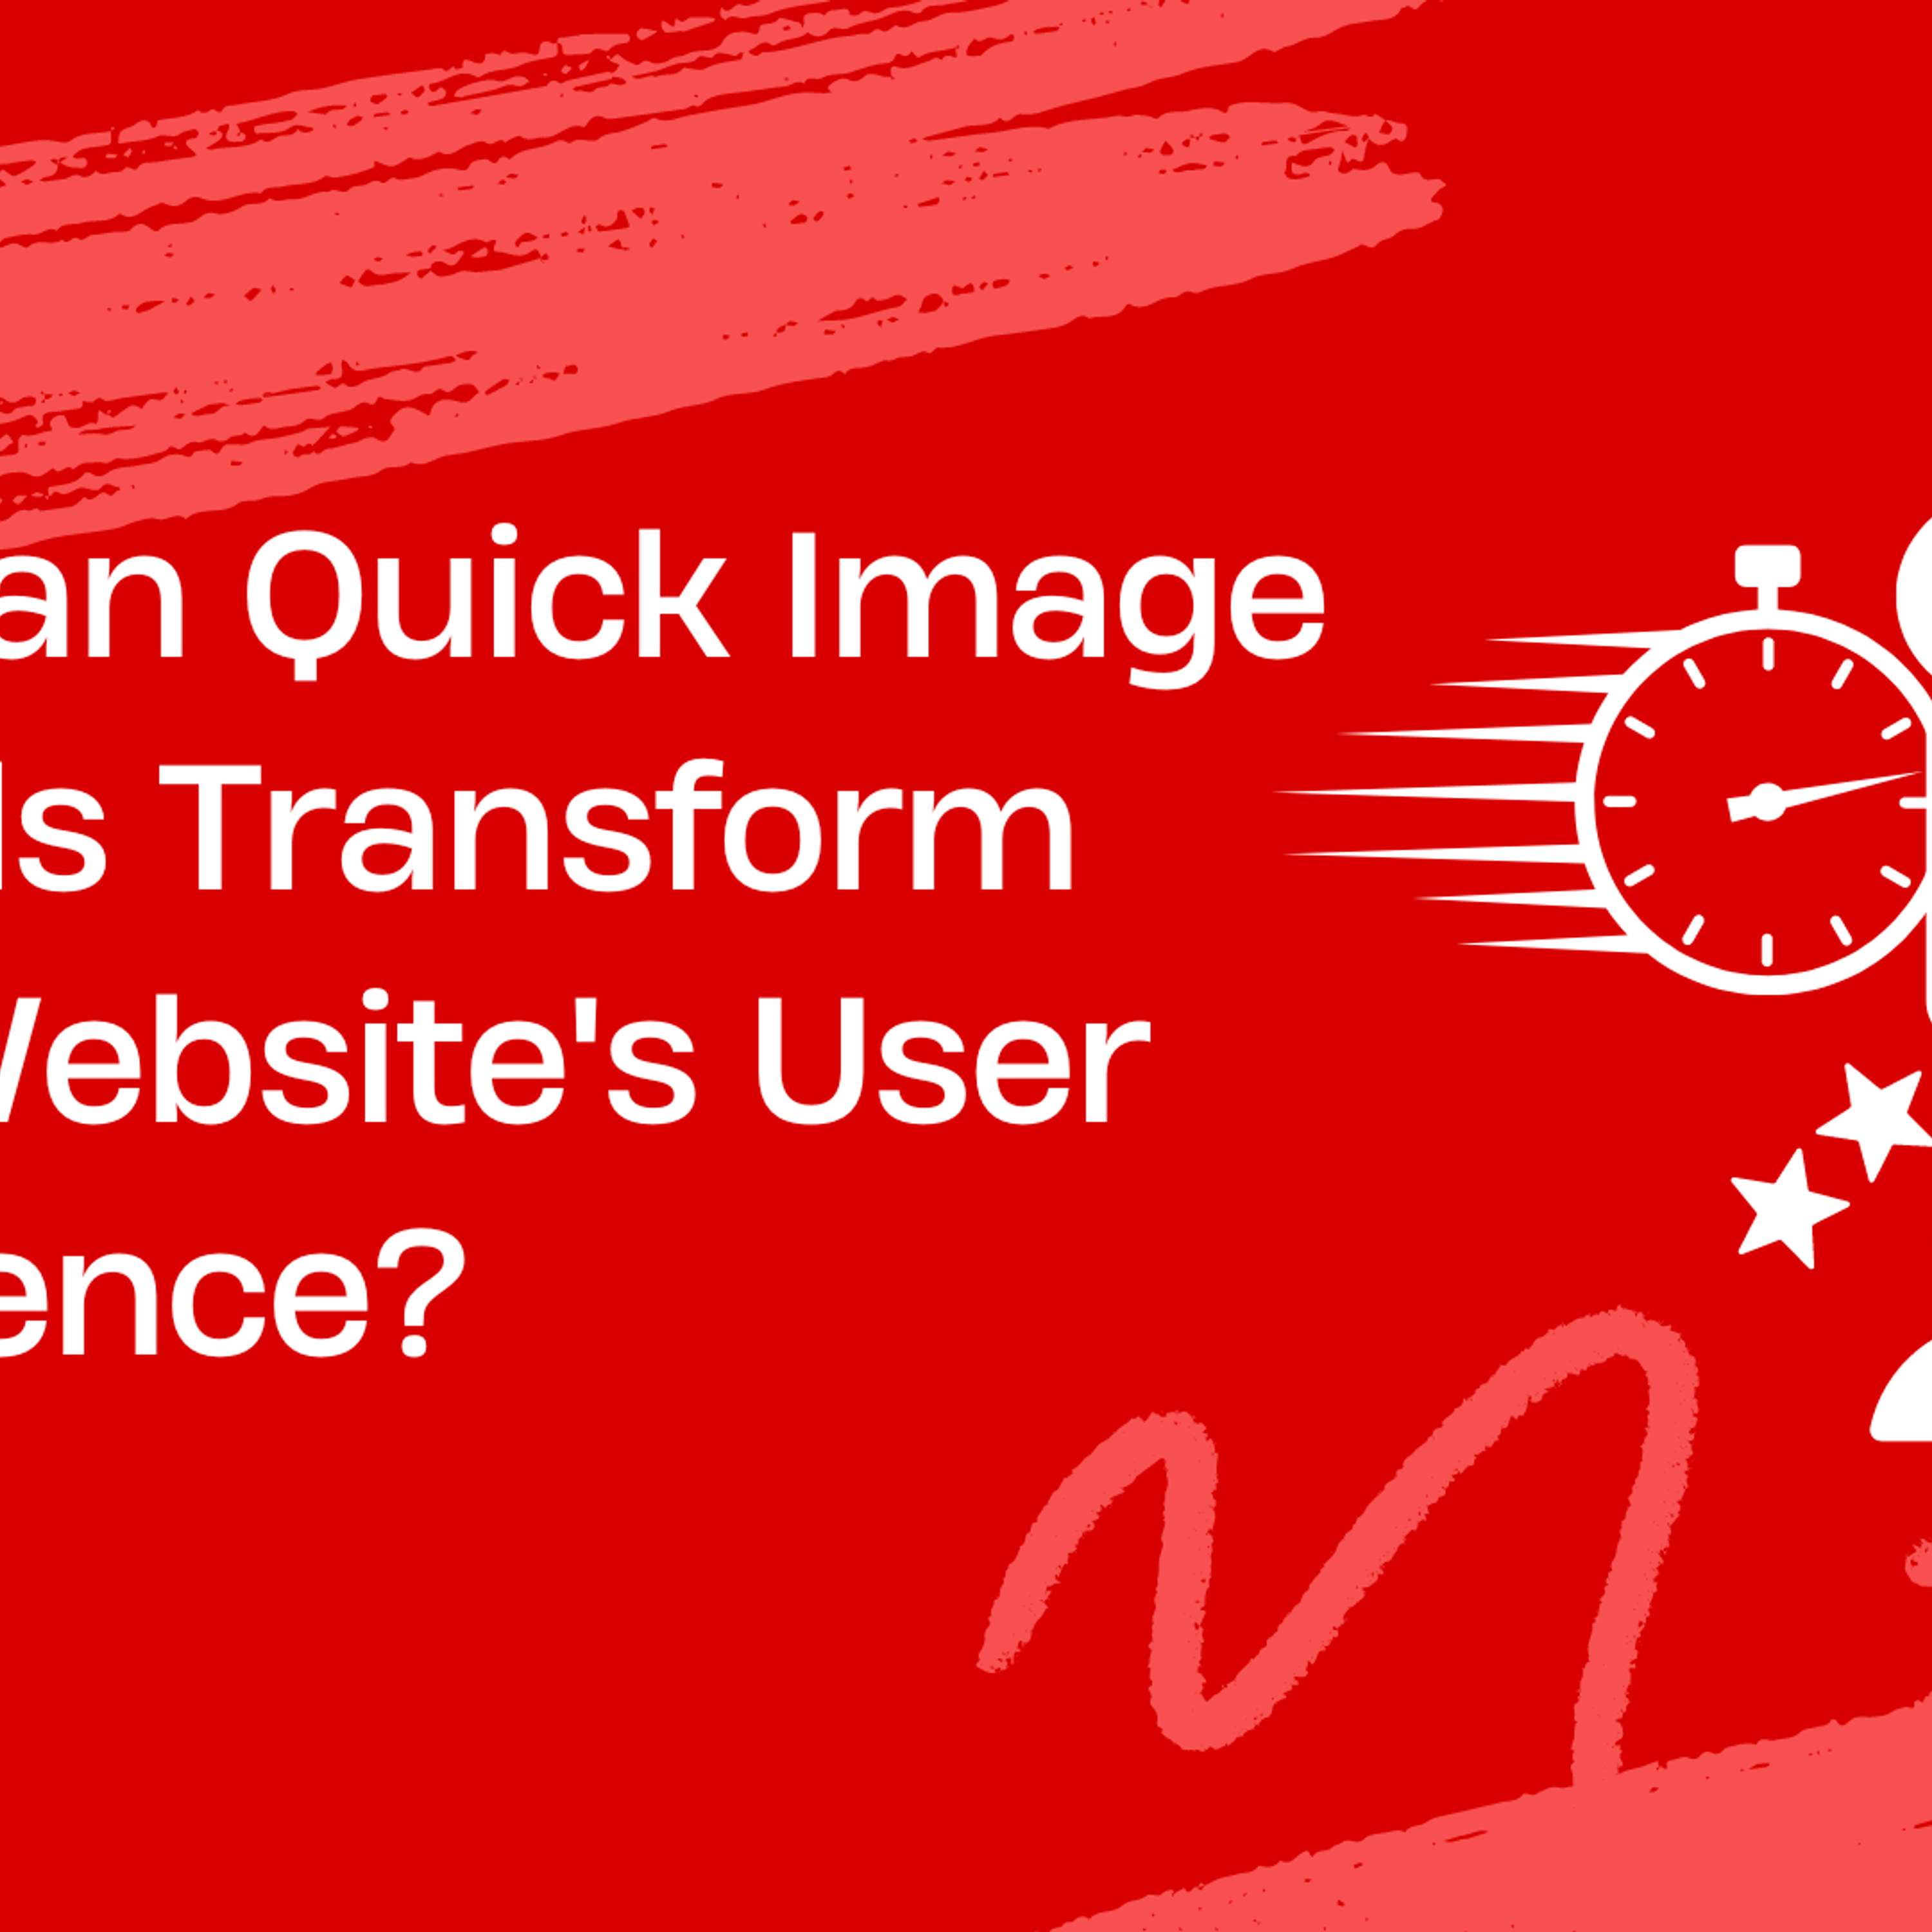 How Quick Image Uploads Enhance User Experience on Your Website